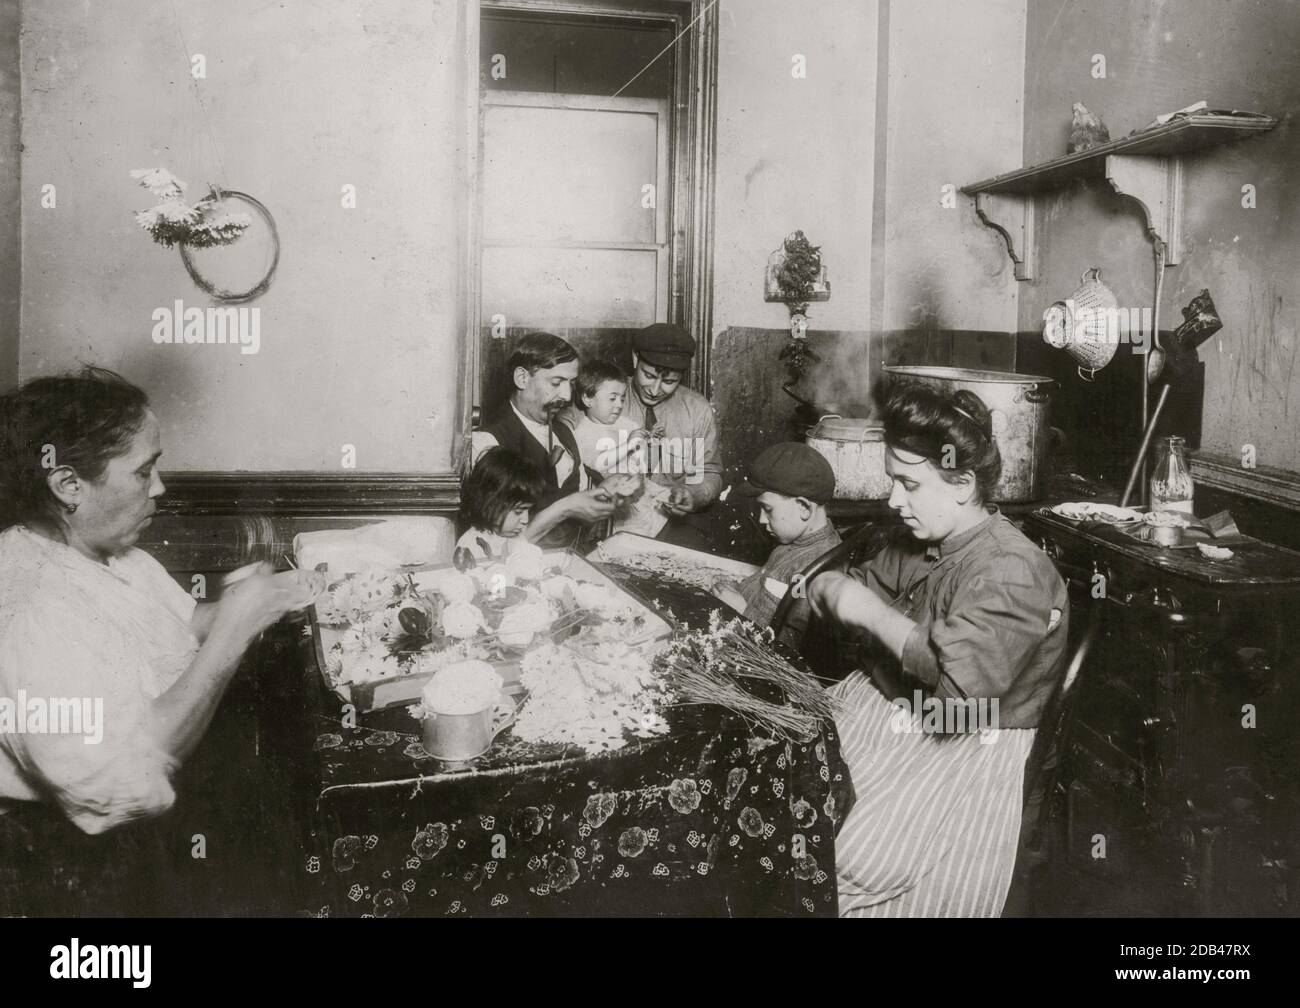 4 P.M. John Sachatello, a barber with a steady job helping family make flowers, 302 Mott St. Making 'bluettes' at $2.00 a gross. Makes $12.00 to $13.00 a week when all work. Mary 5 yrs. old. Tommy 7 yrs. old.. Stock Photo